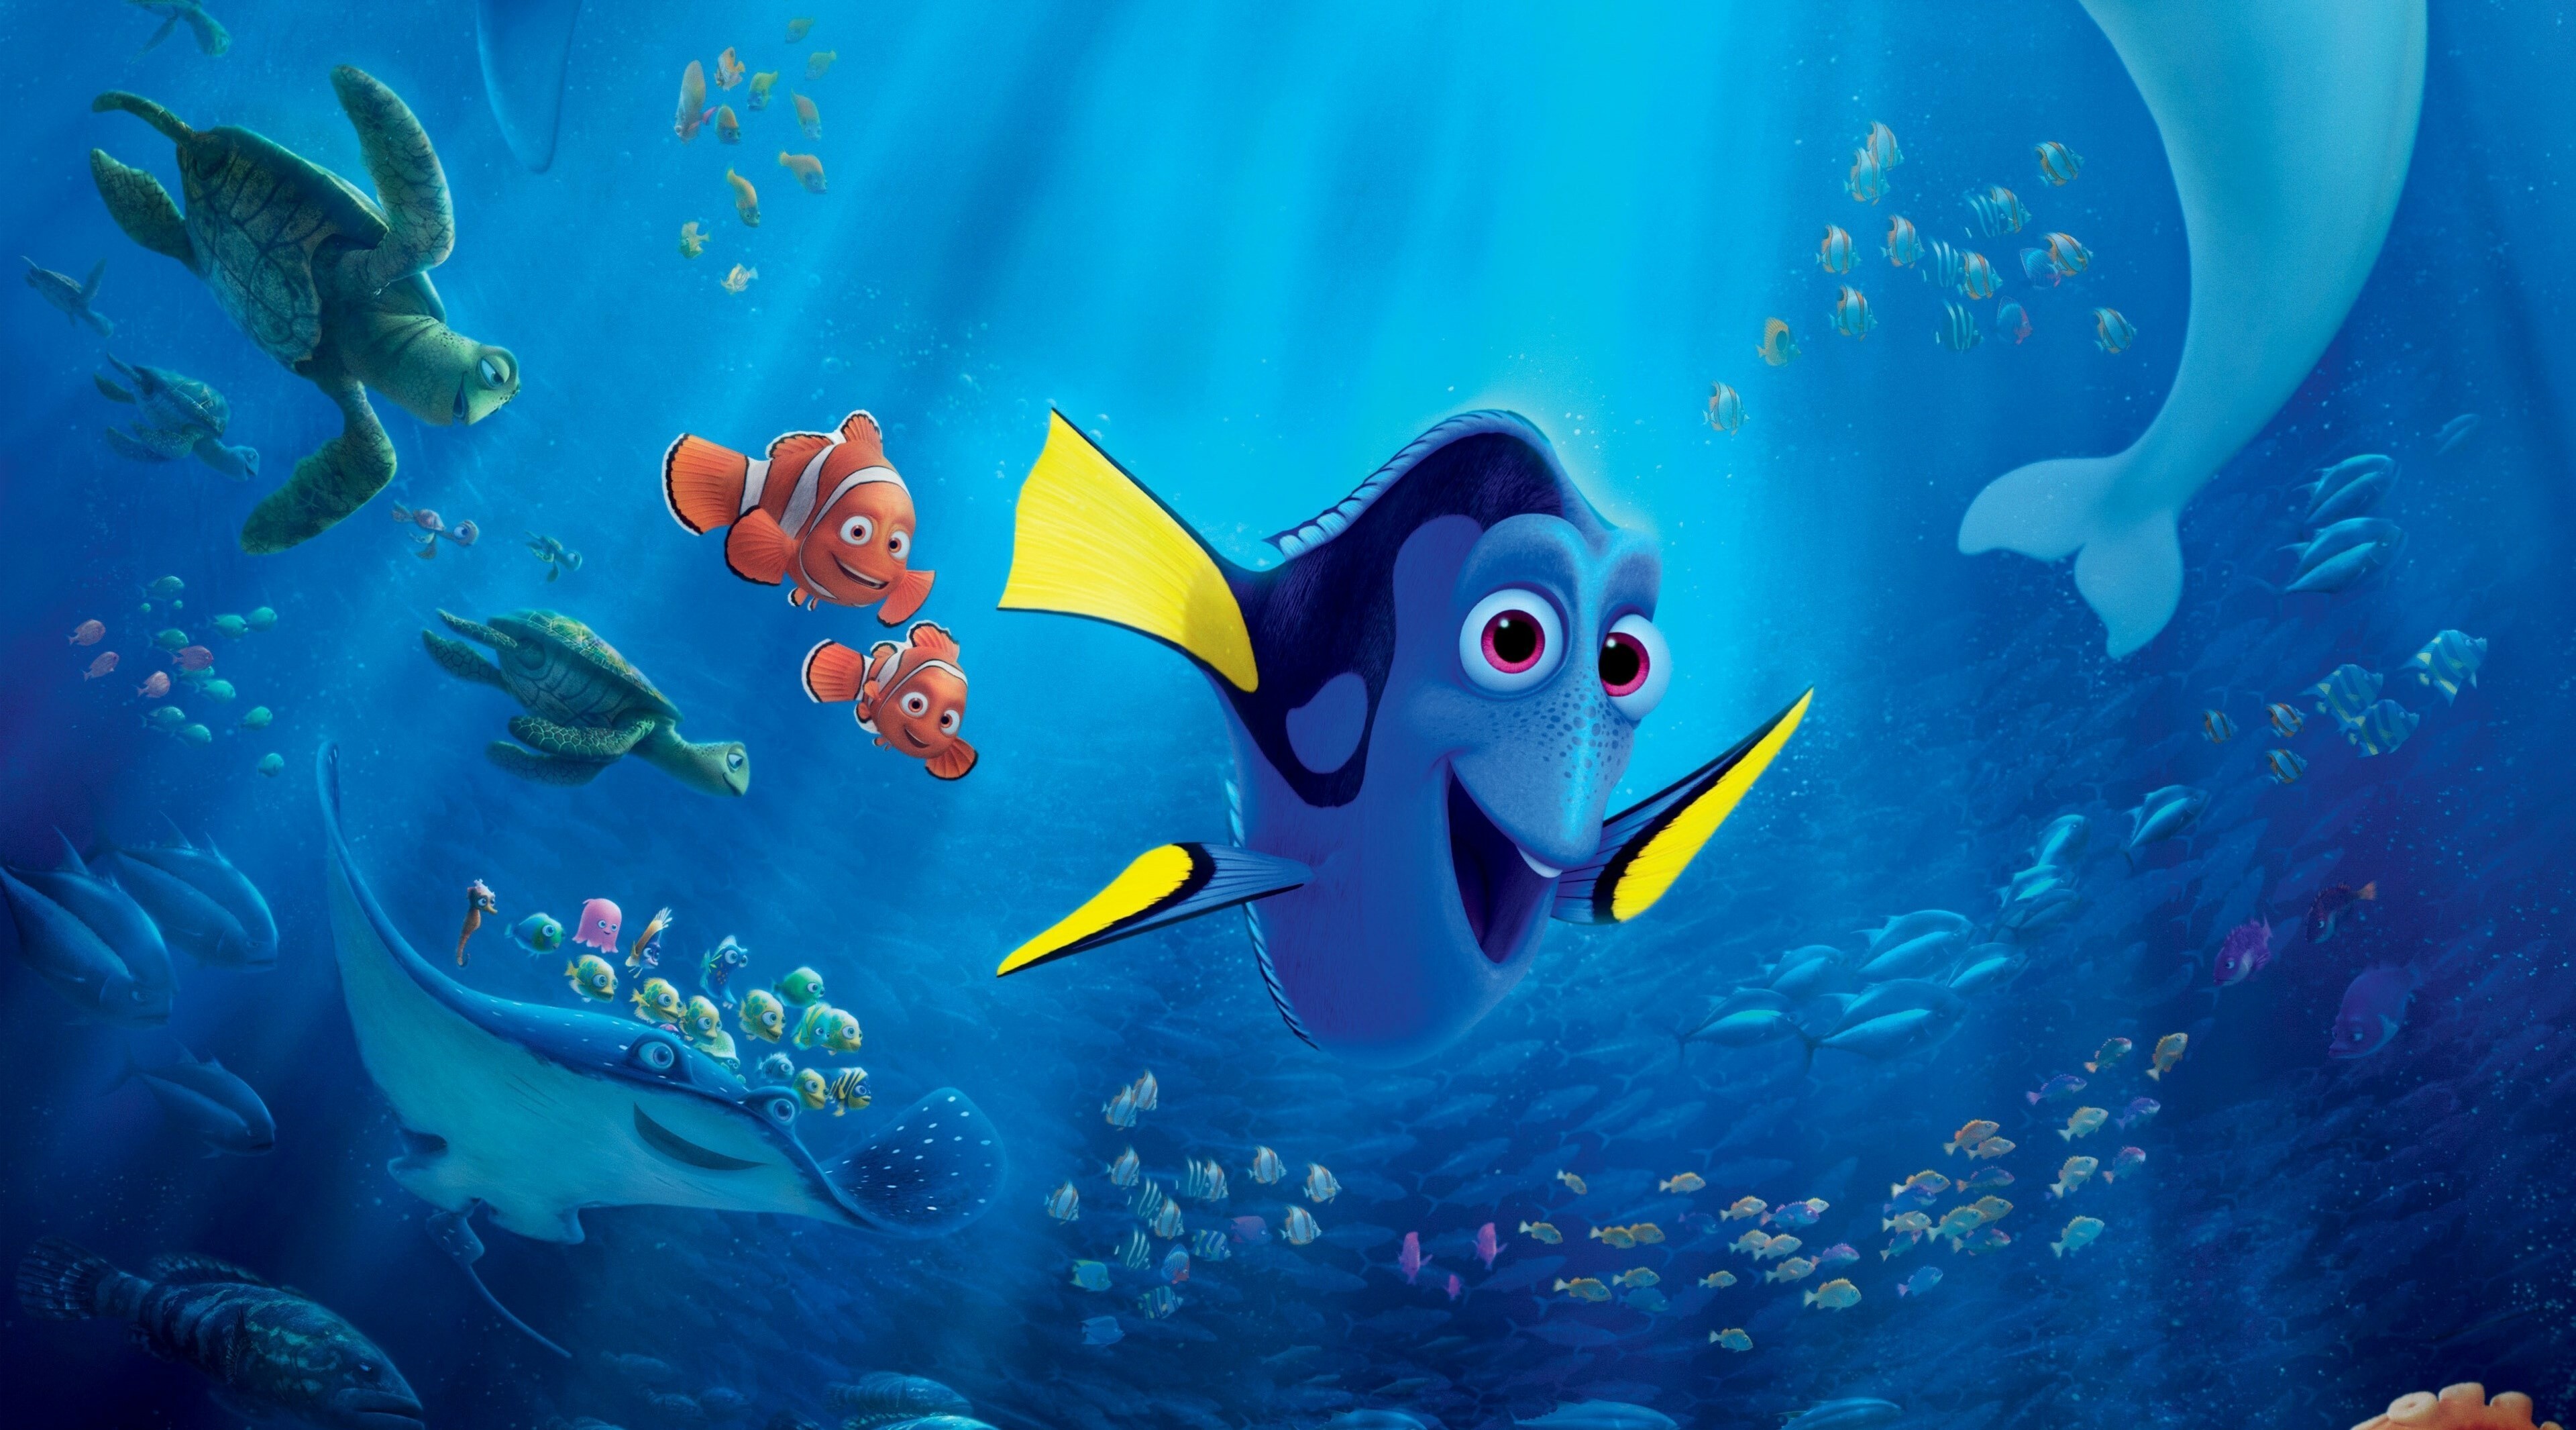 Finding Dory: At the time of its release, it was the 22nd-highest-grossing film of all time, and the fourth-highest-grossing animated film of all time during its theatrical run. 3840x2140 HD Wallpaper.